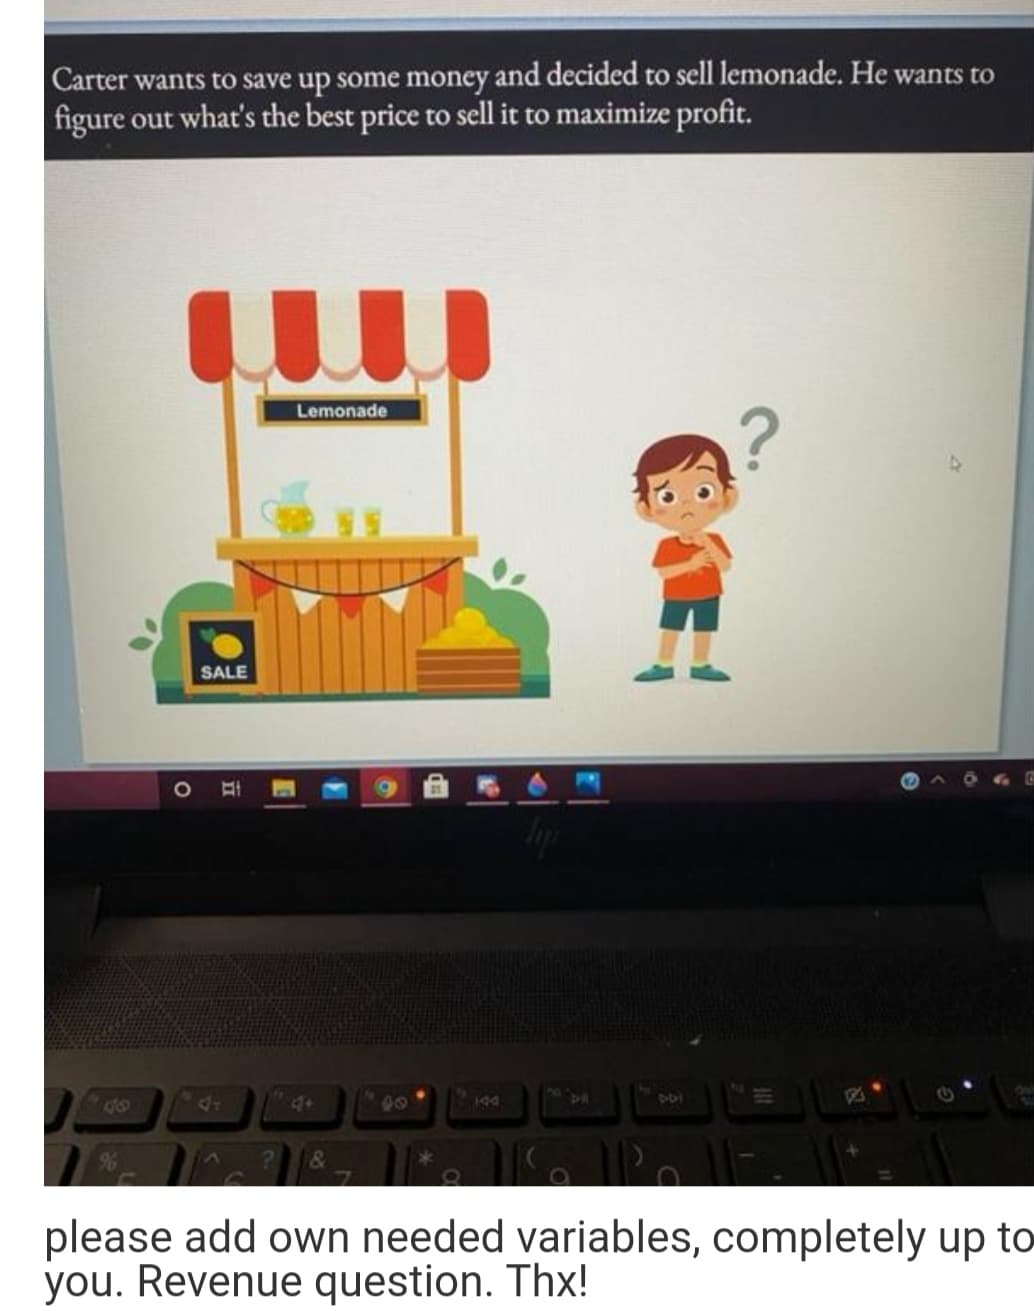 Carter wants to save up some money and decided to sell lemonade. He wants to
figure out what's the best price to sell it to maximize profit.
Lemonade
SALE
10
8
4+
44
00
&
please add own needed variables, completely up to
you. Revenue question. Thx!
